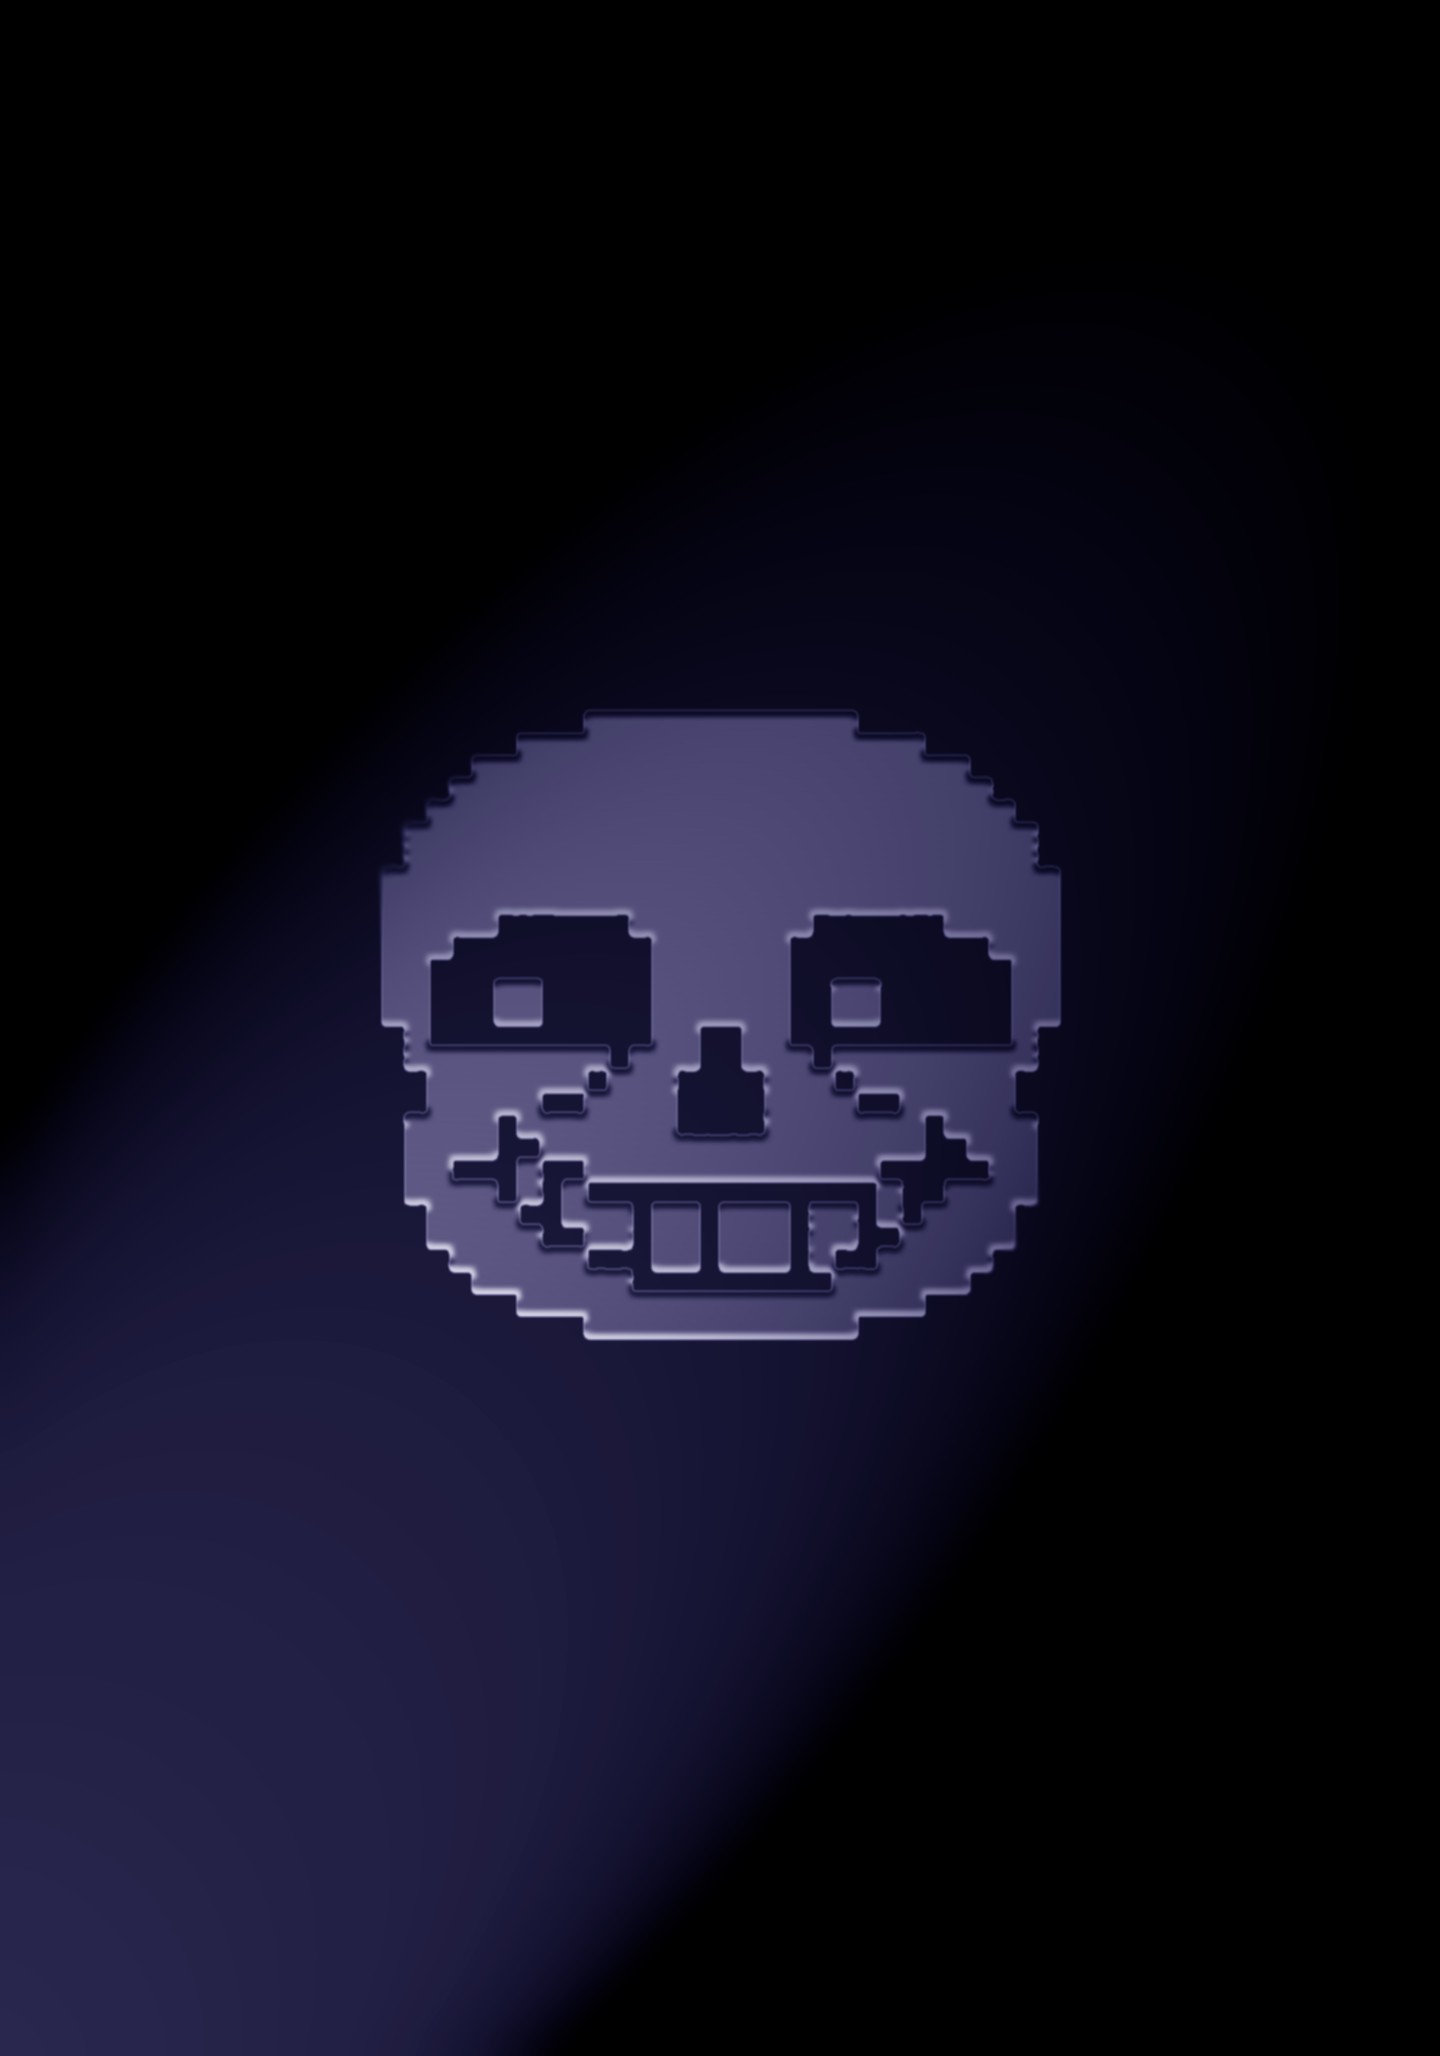 Undertale phone wallpaper \u00b7\u2460 Download free backgrounds for desktop and mobile devices in any 